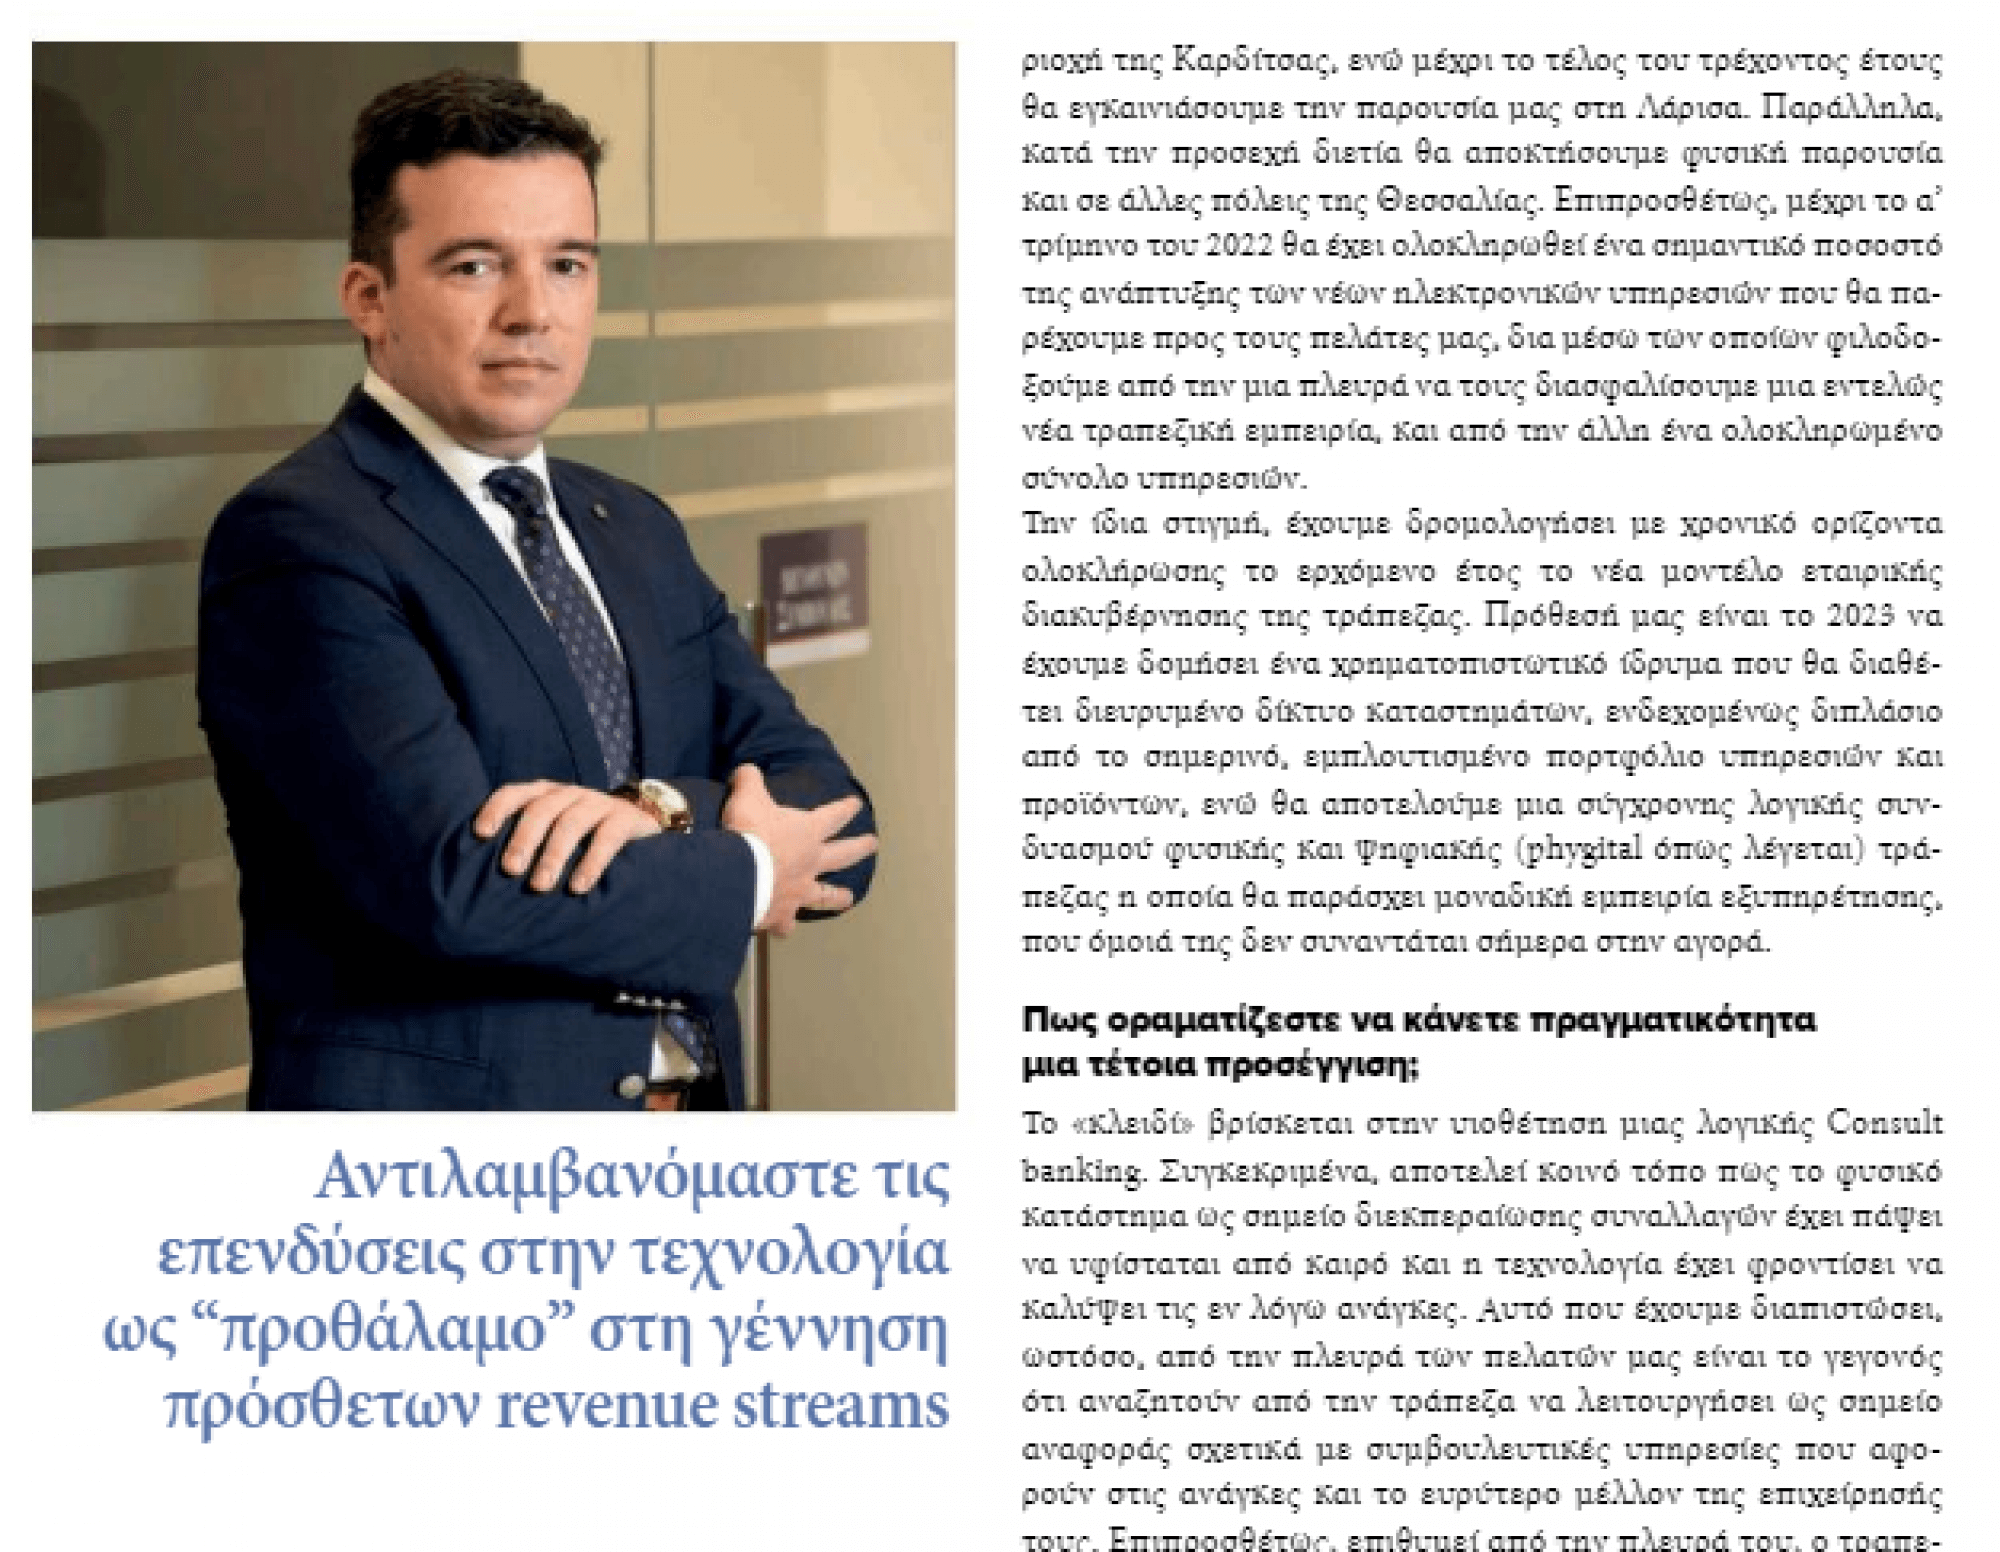 Natech news: The role of Natech systems in the digital transformation of Cooperative Bank of Karditsa